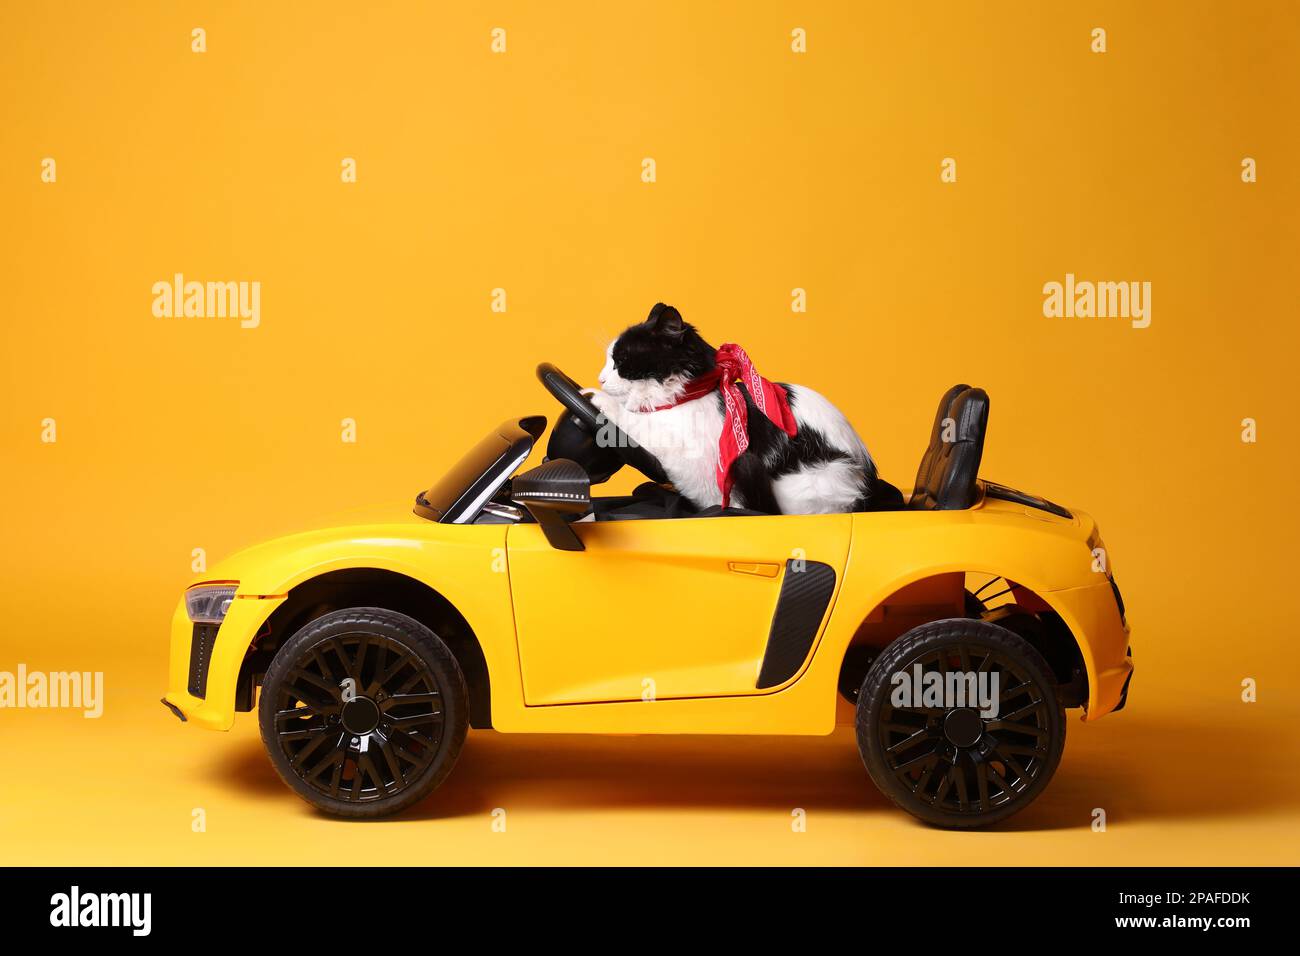 Adorable cat in toy car on yellow background Stock Photo - Alamy